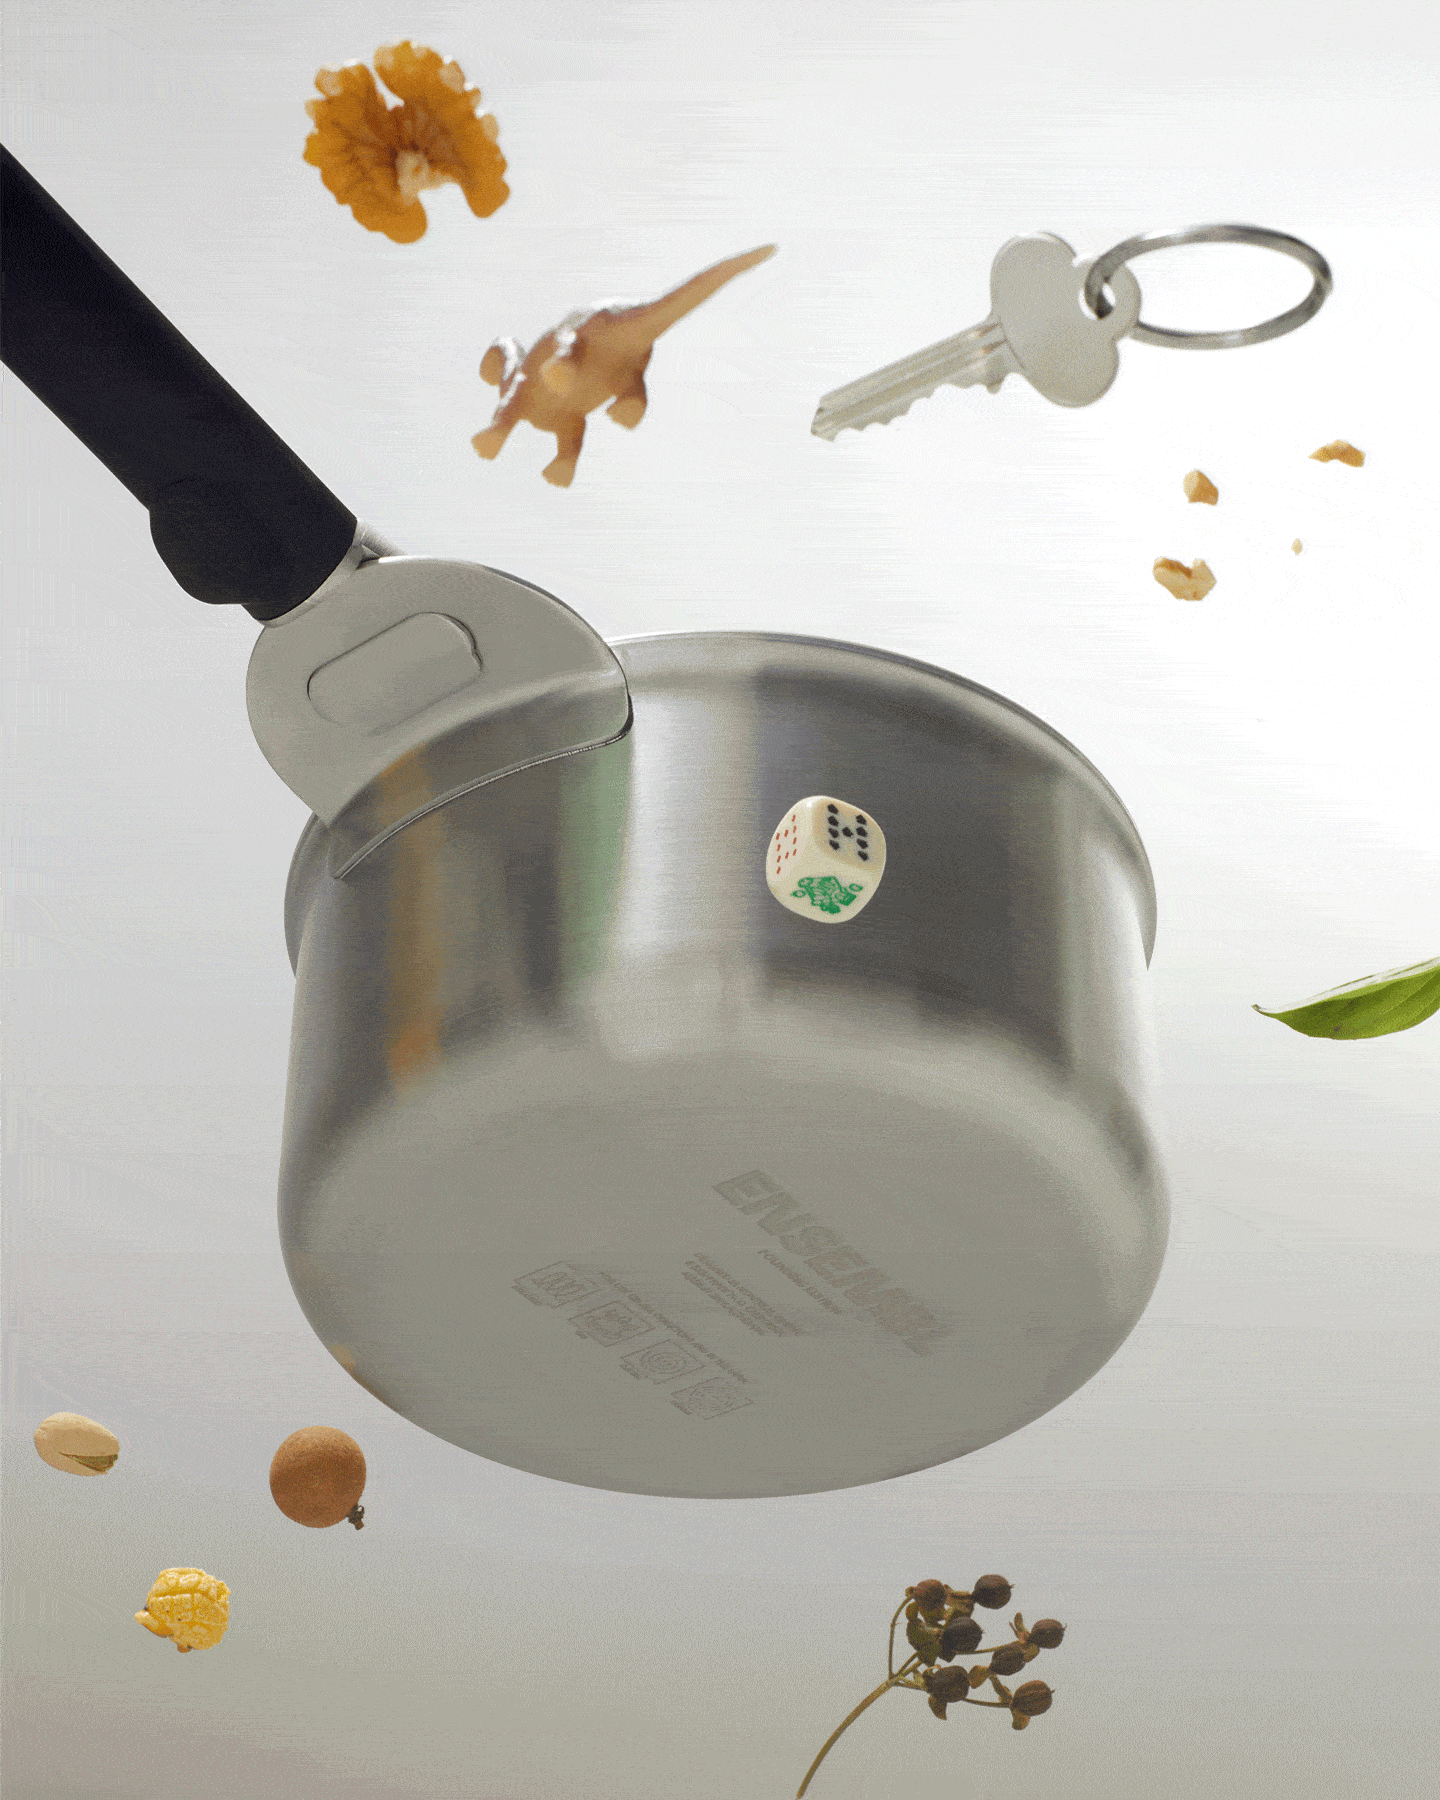 ENSEMBL Stackware stainless steel cookware removable handle in use